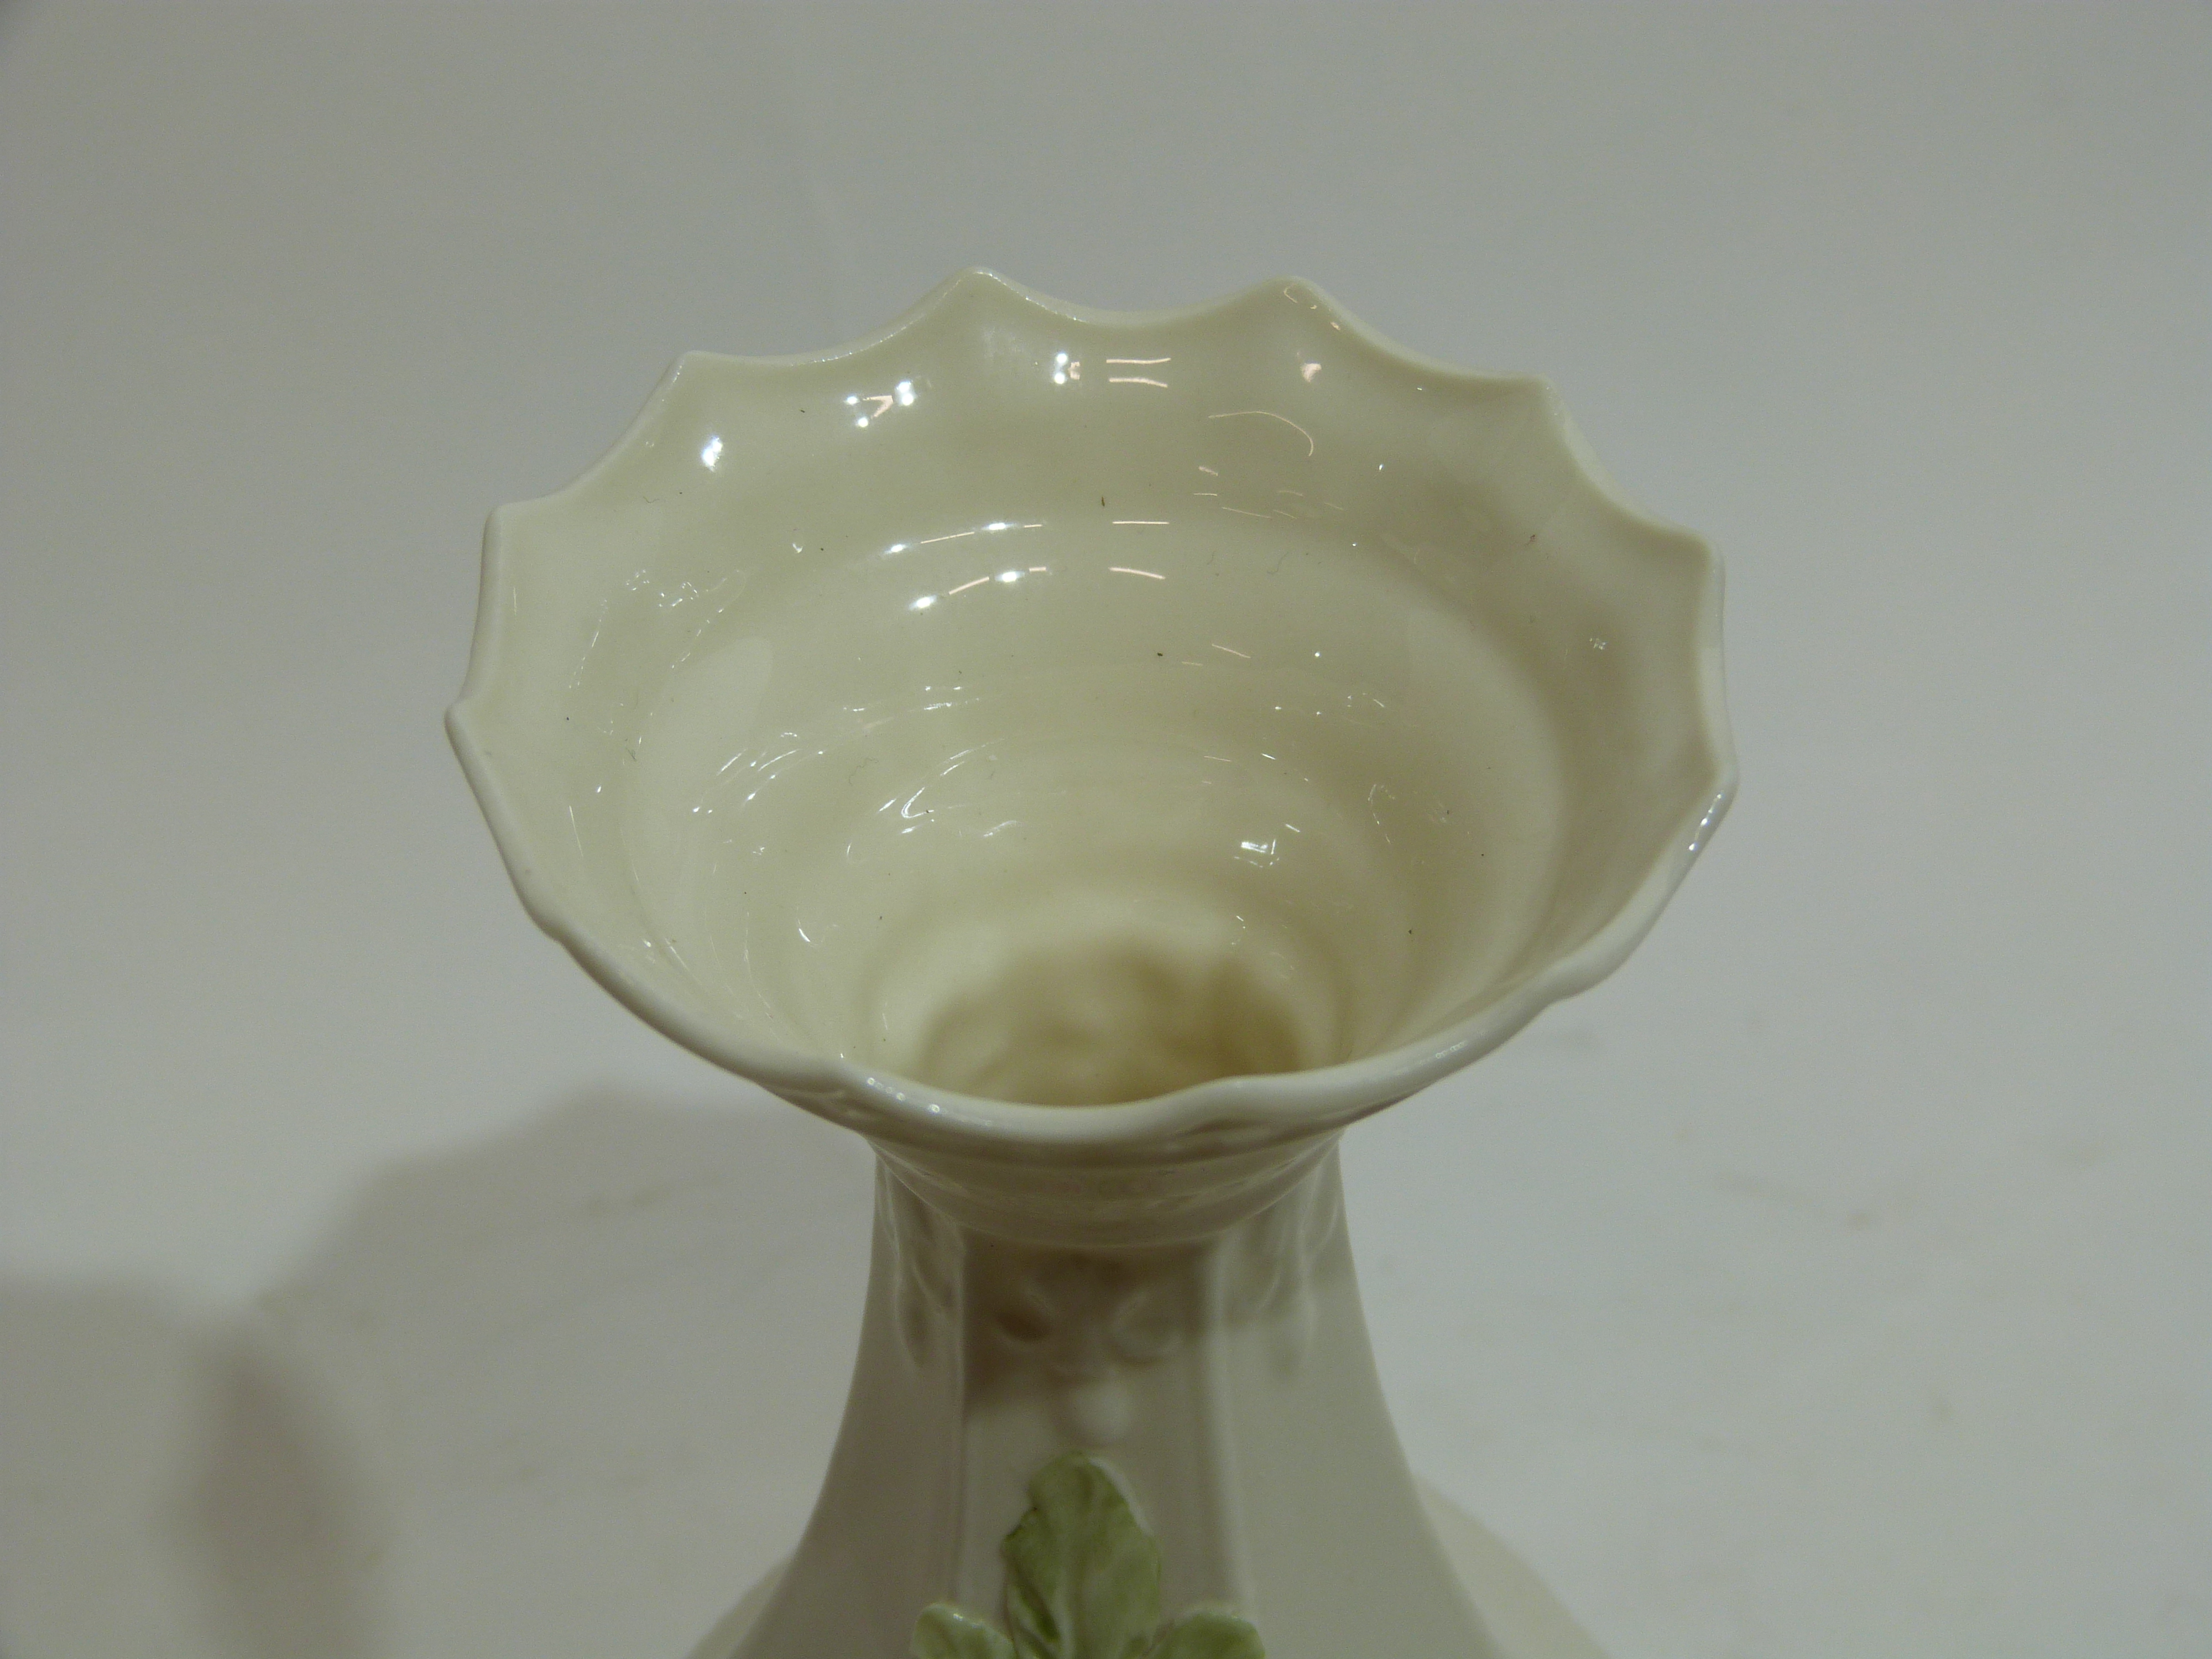 Belleek vase with a floral design of leaves and flowers in relief - Image 3 of 4